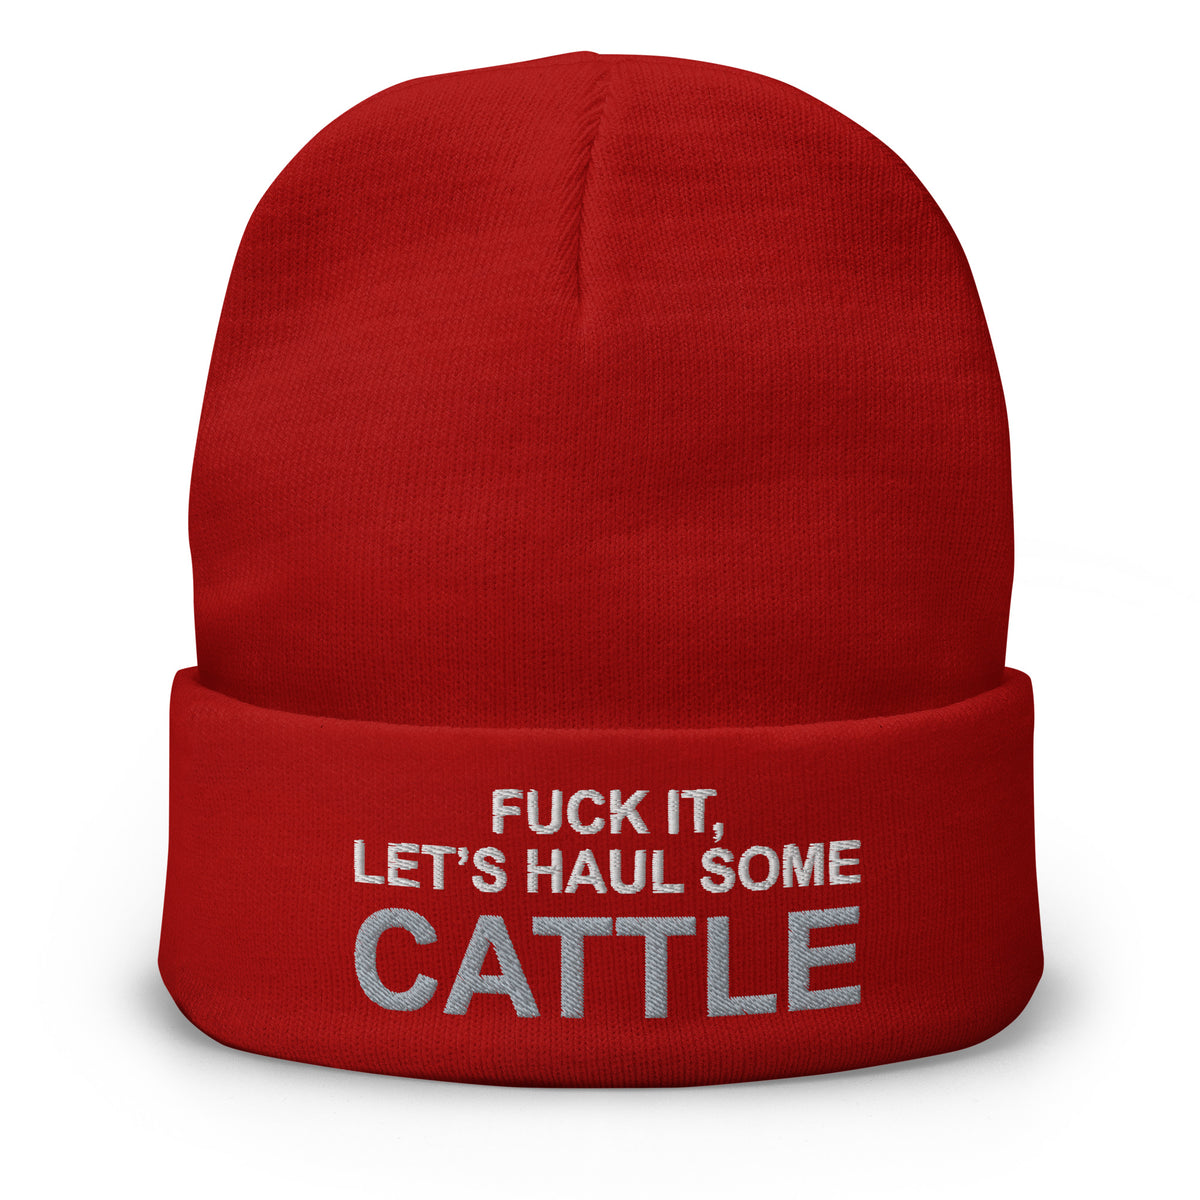 Fuck It, Let's Haul Some Cattle - Embroidered Beanie - Bull Hauler - Free Shipping